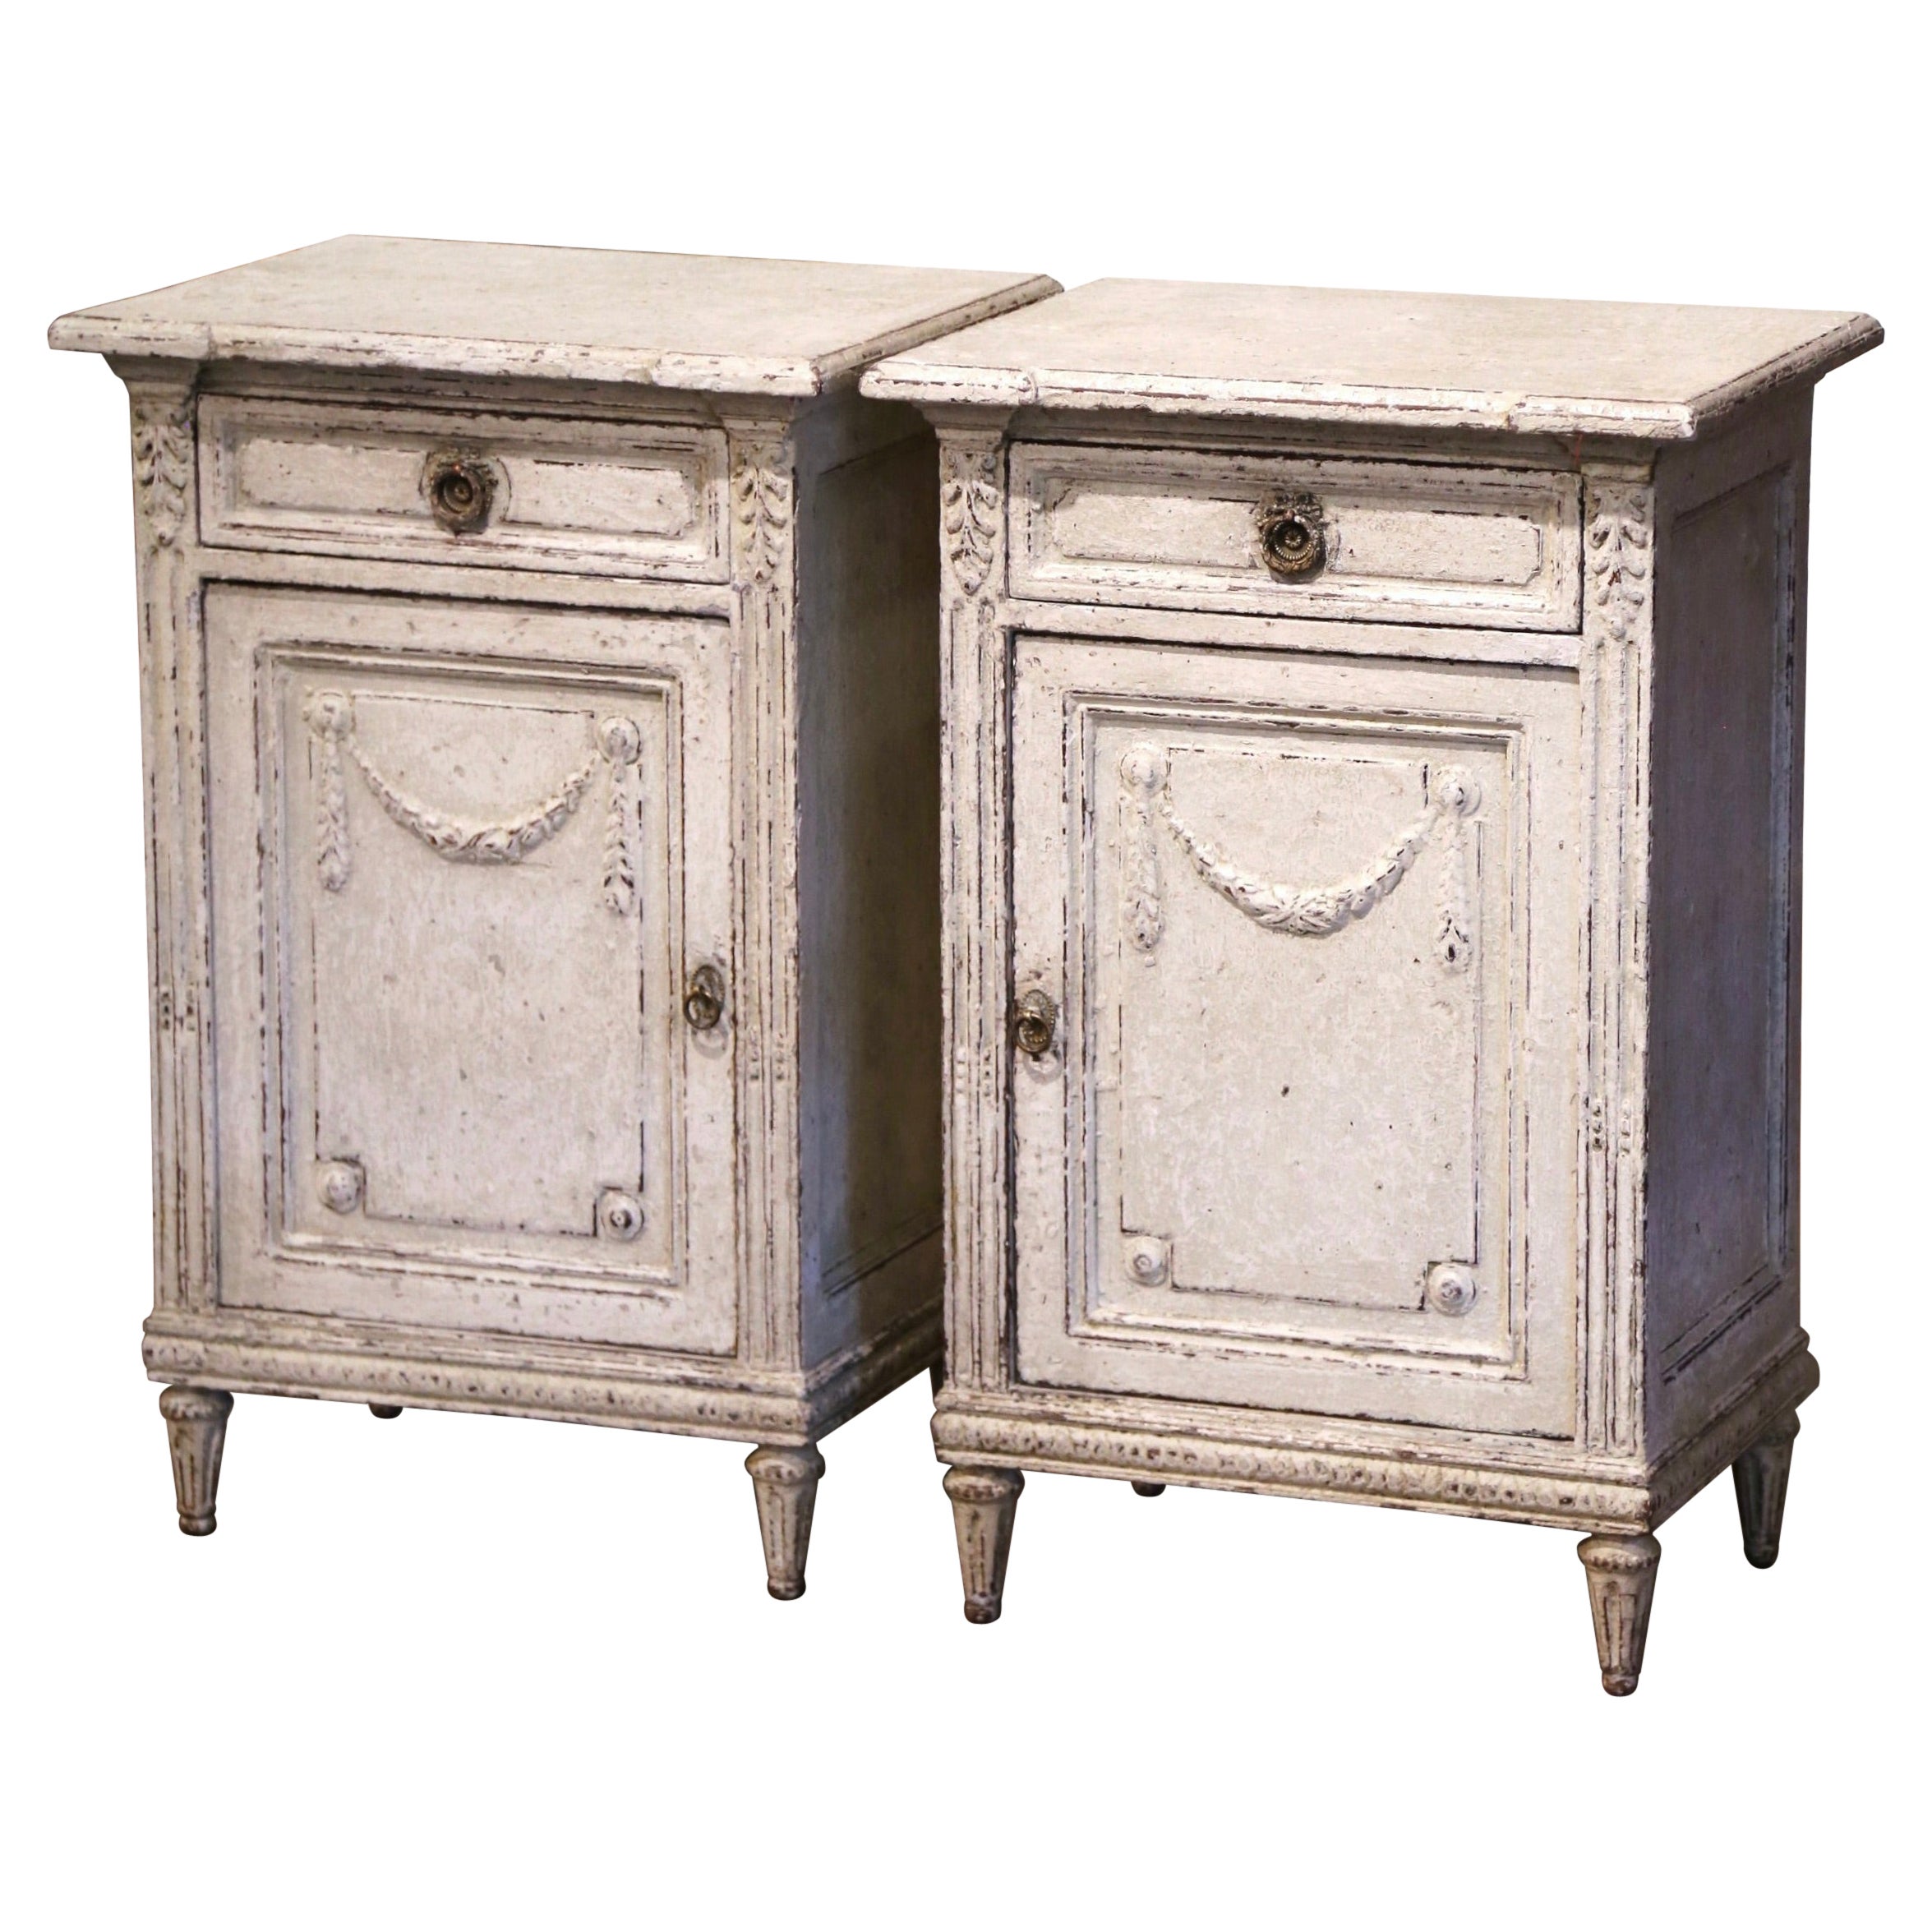 Pair of 19th Century French Louis XVI Painted Nightstands Bedside Tables